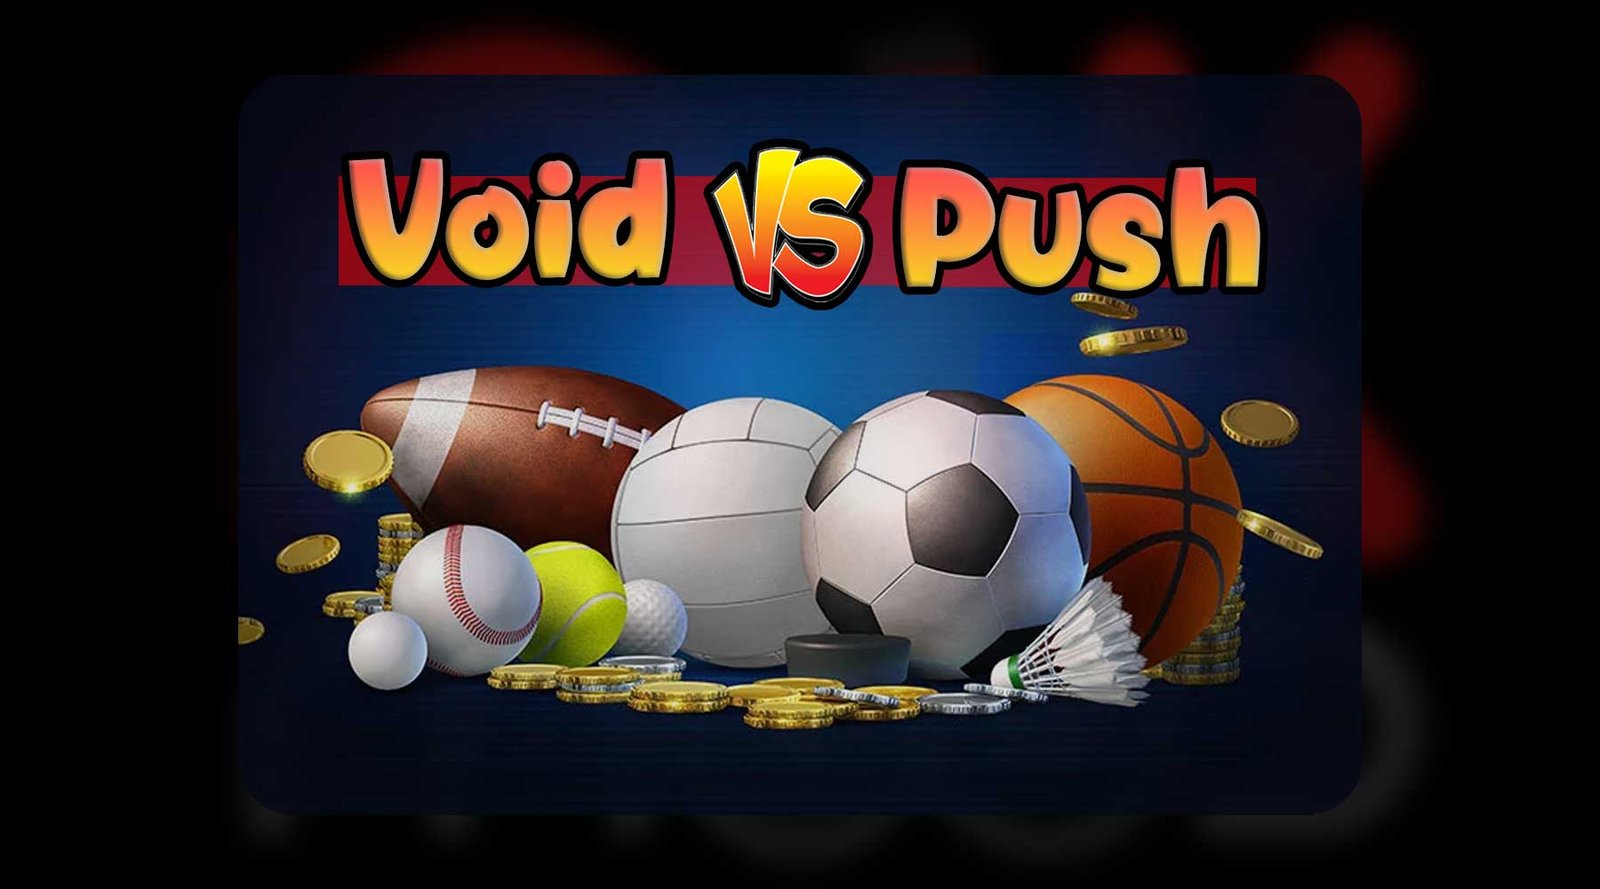 Void VS. Push: What Are The Key Differences?